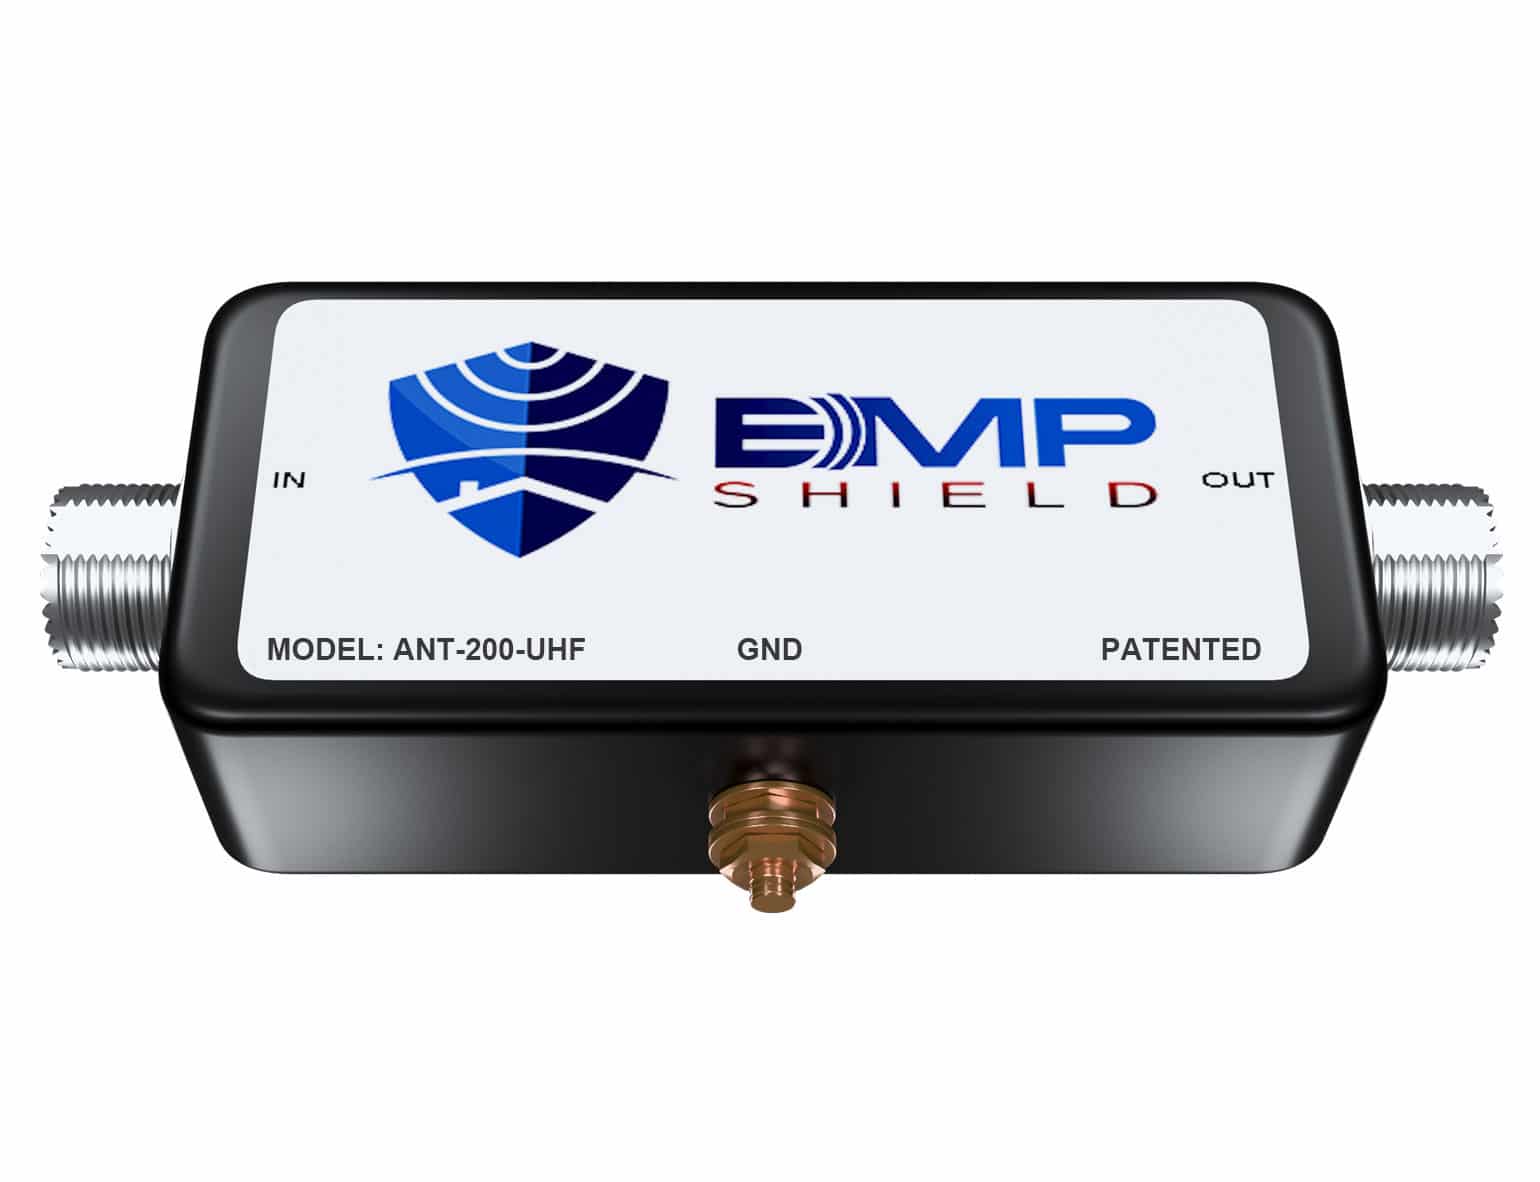 The EMP shield with UHF connectors is displayed on a white background.